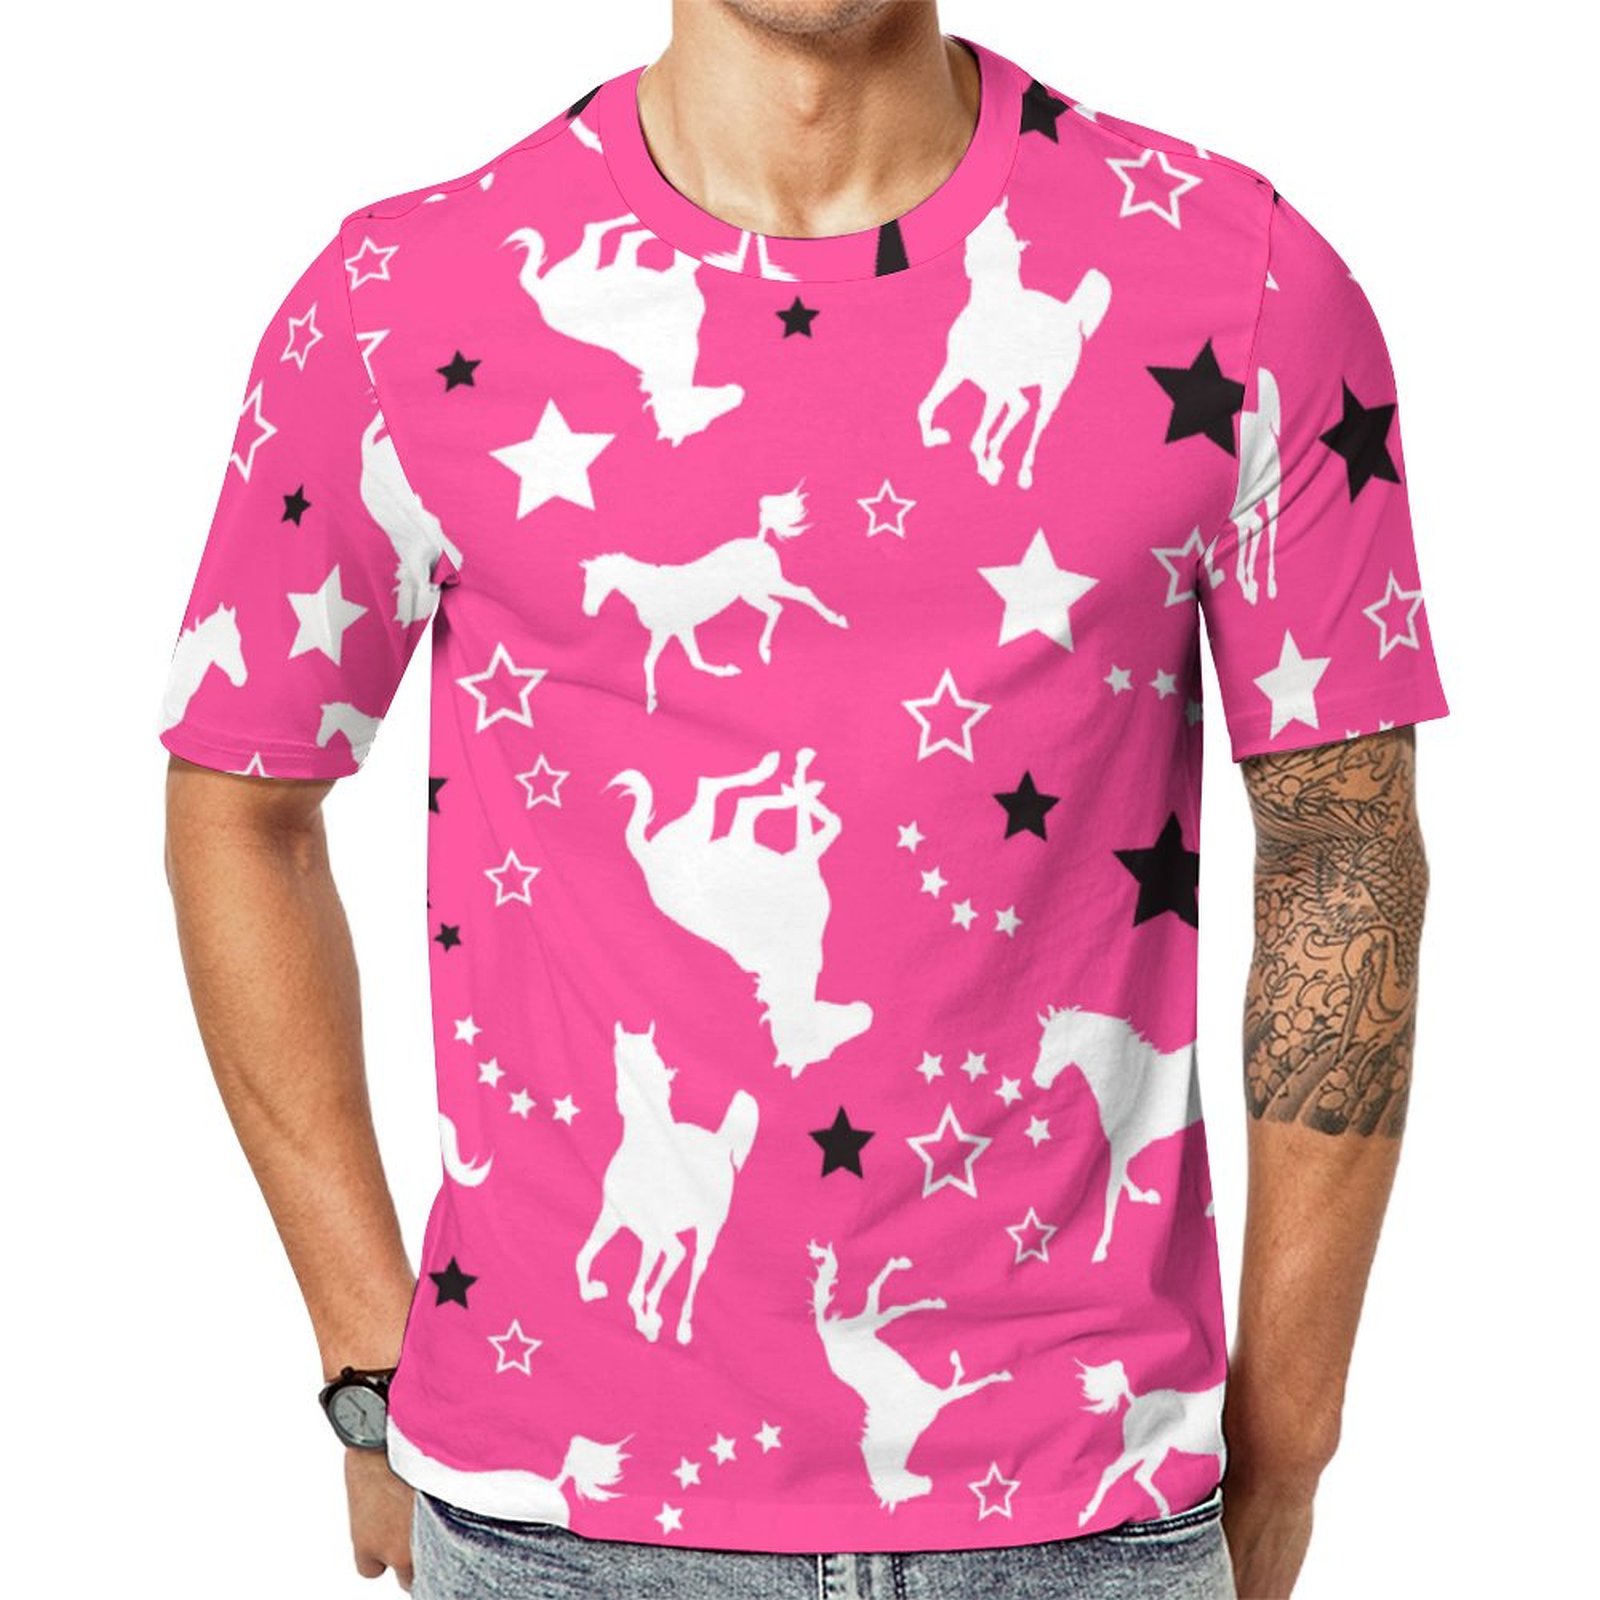 Hot Pink Horse Equestrian Short Sleeve Print Unisex Tshirt Summer Casual Tees for Men and Women Coolcoshirts